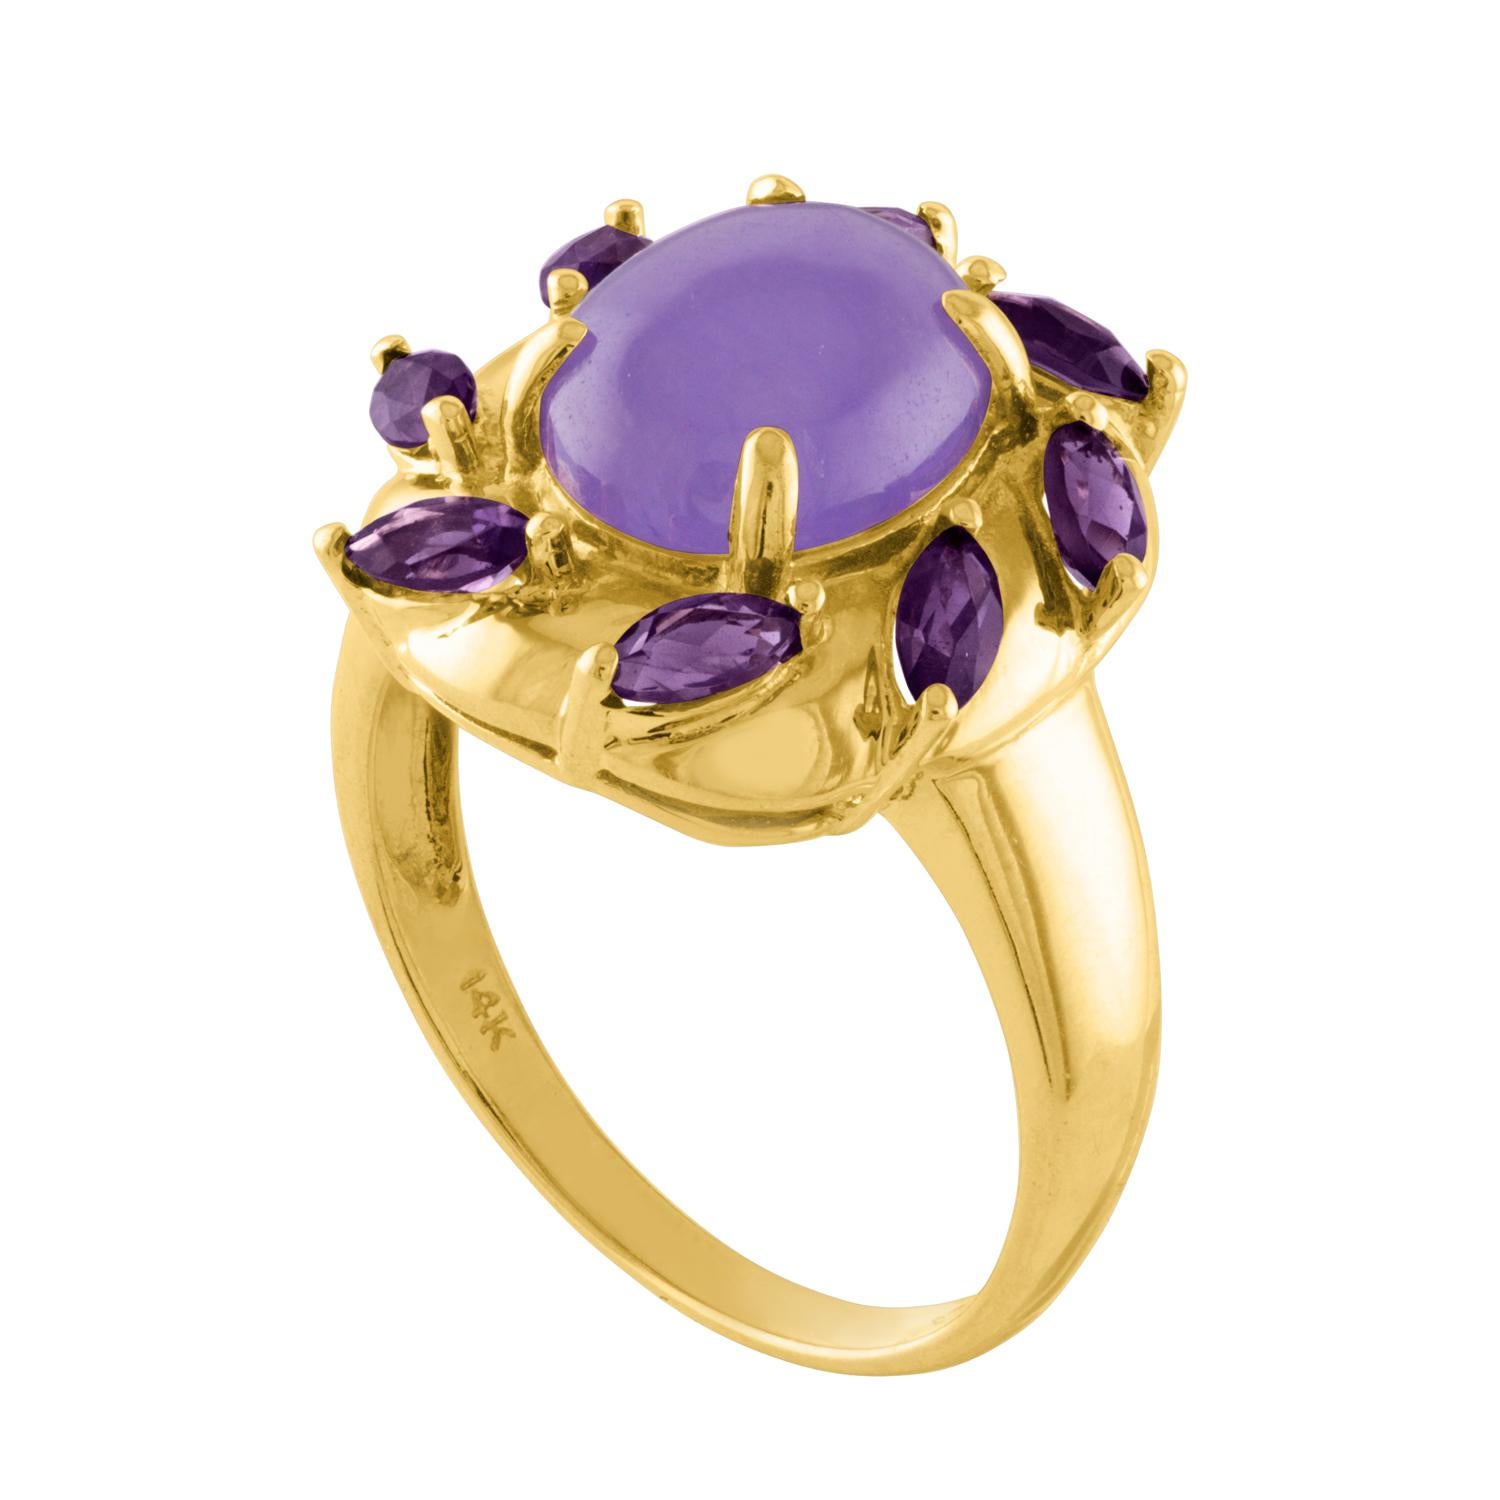 Stunning Vintage Piece
The ring is 14K Yellow Gold
The Center is a 4.00 Carat Jade
It is a Natural Lavender Violet Oval Cabochon Jade Jadeite
There is 1.00 Carats in Purple Amethyst Marquise Shape
The ring is a size 6, sizable
The ring weighs 3.5